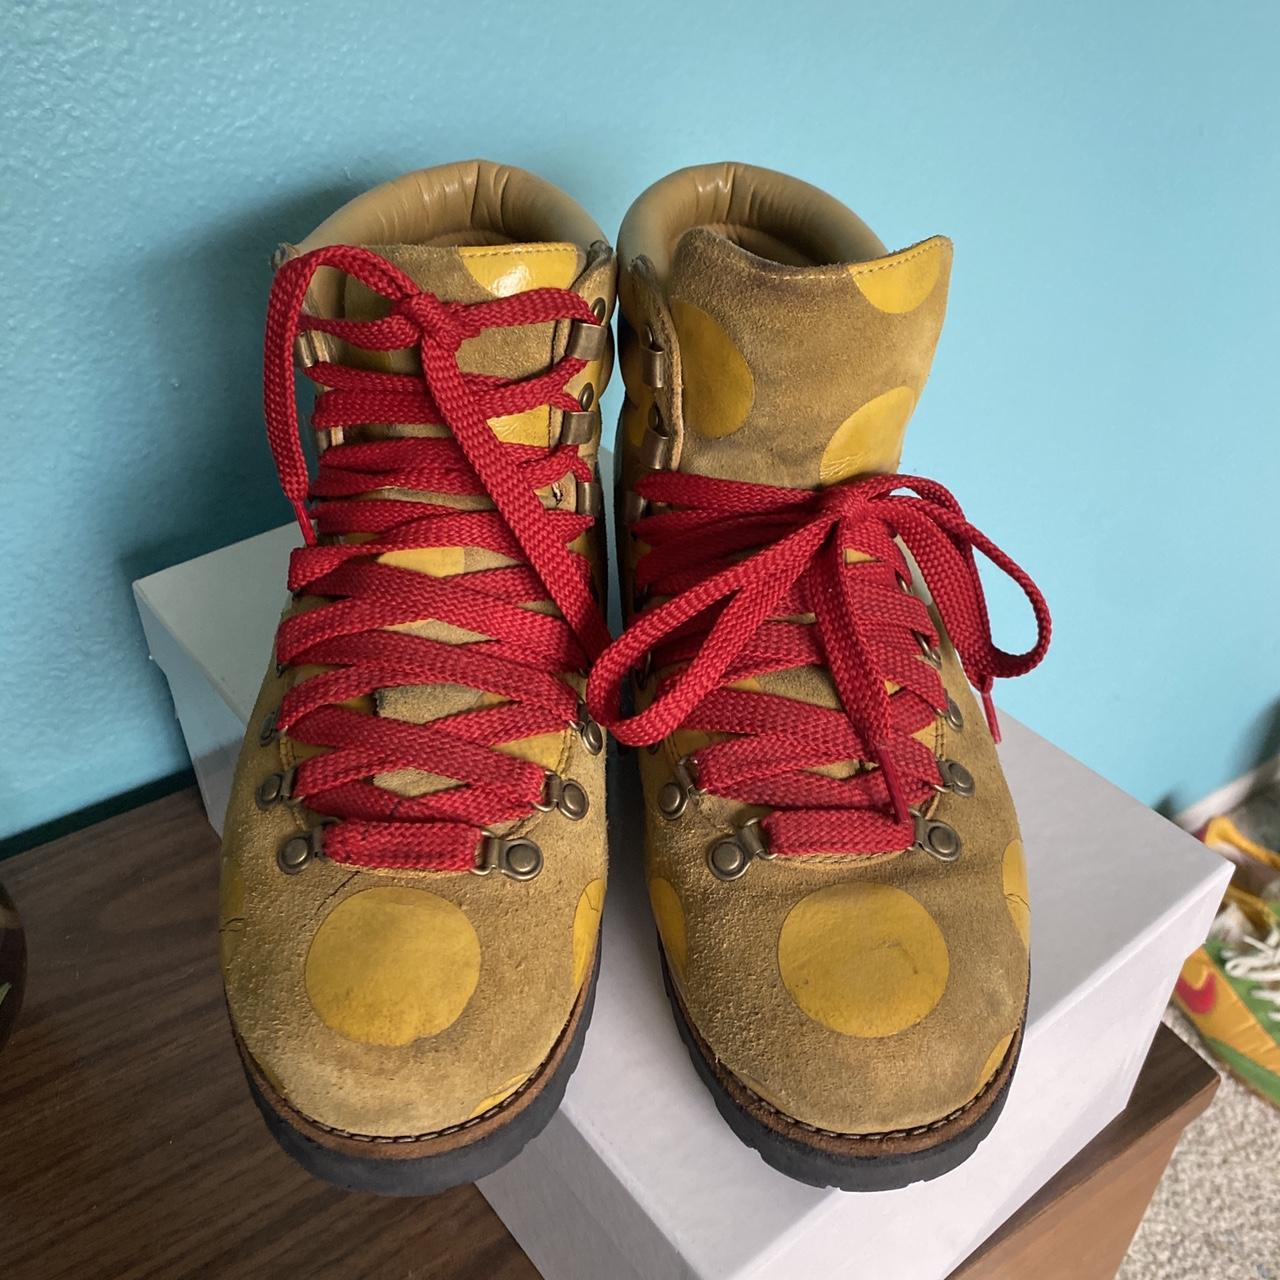 Jeremy Scott Men's Red and Yellow Boots (2)